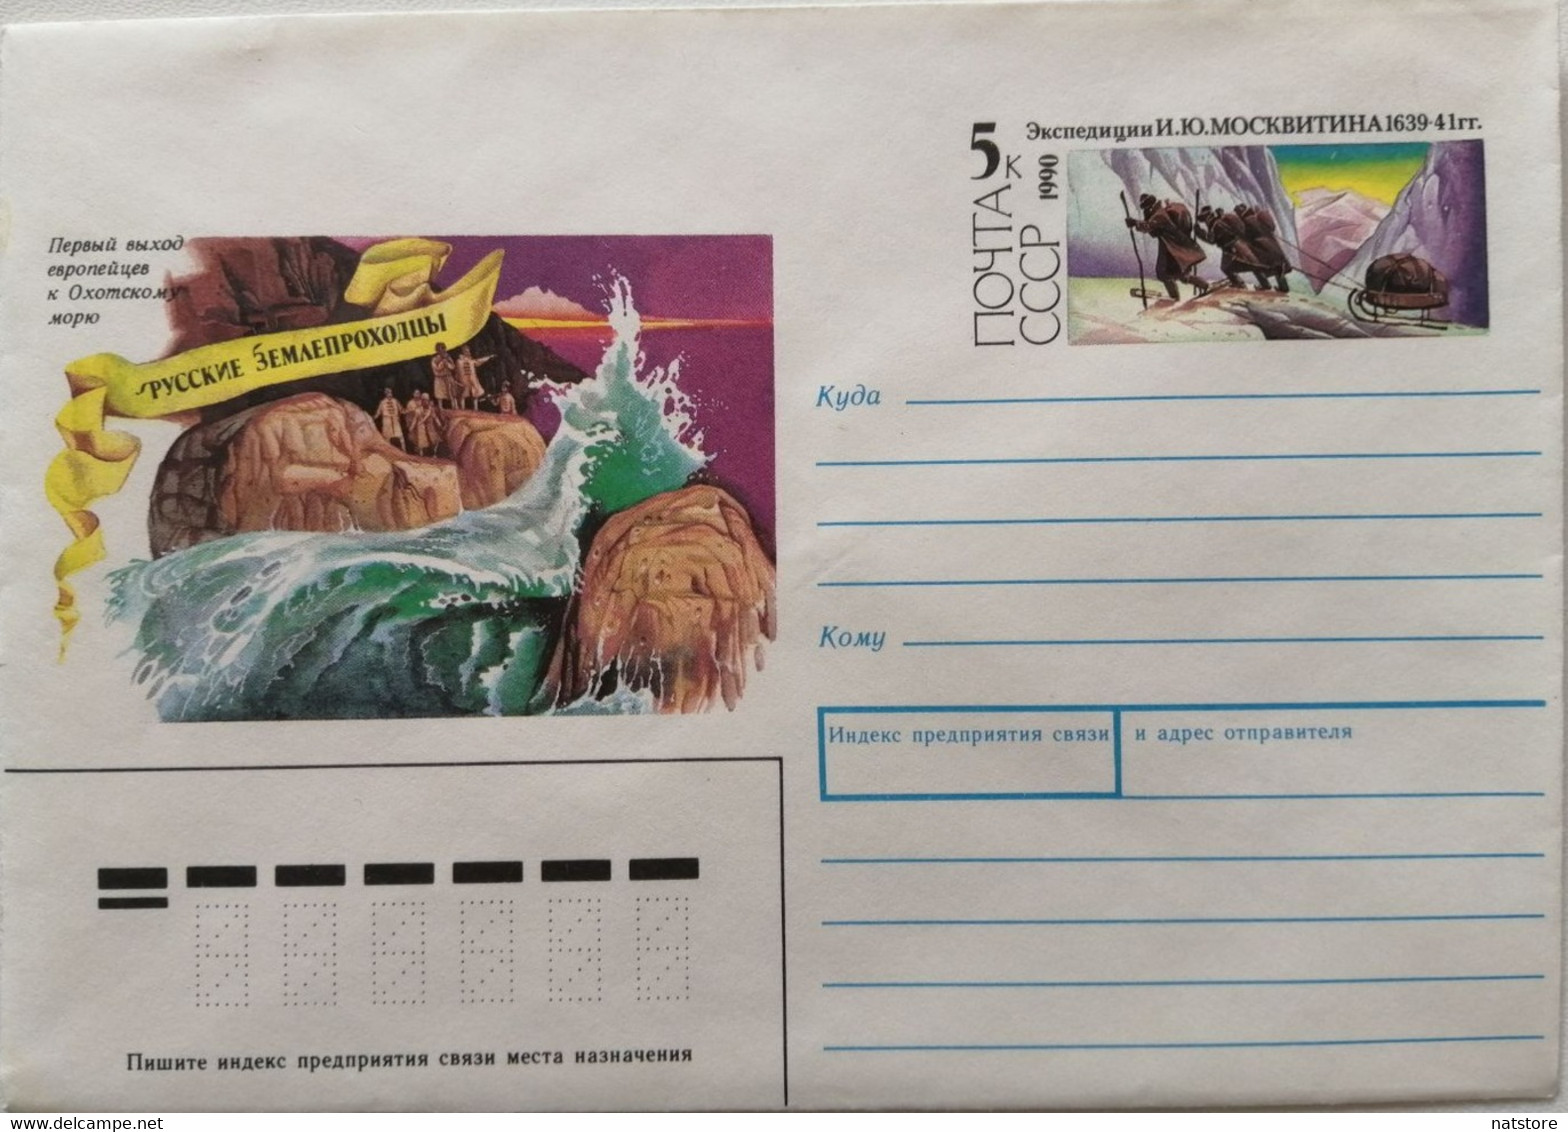 1990..USSR..  COVER WITH STAMP ..THE FIRST EXIT OF EUROPEANS TO THE SEA OF OKHOTSK..I.Y.MOSKVITIN EXPEDITION.. NEW!!! - Polarforscher & Promis